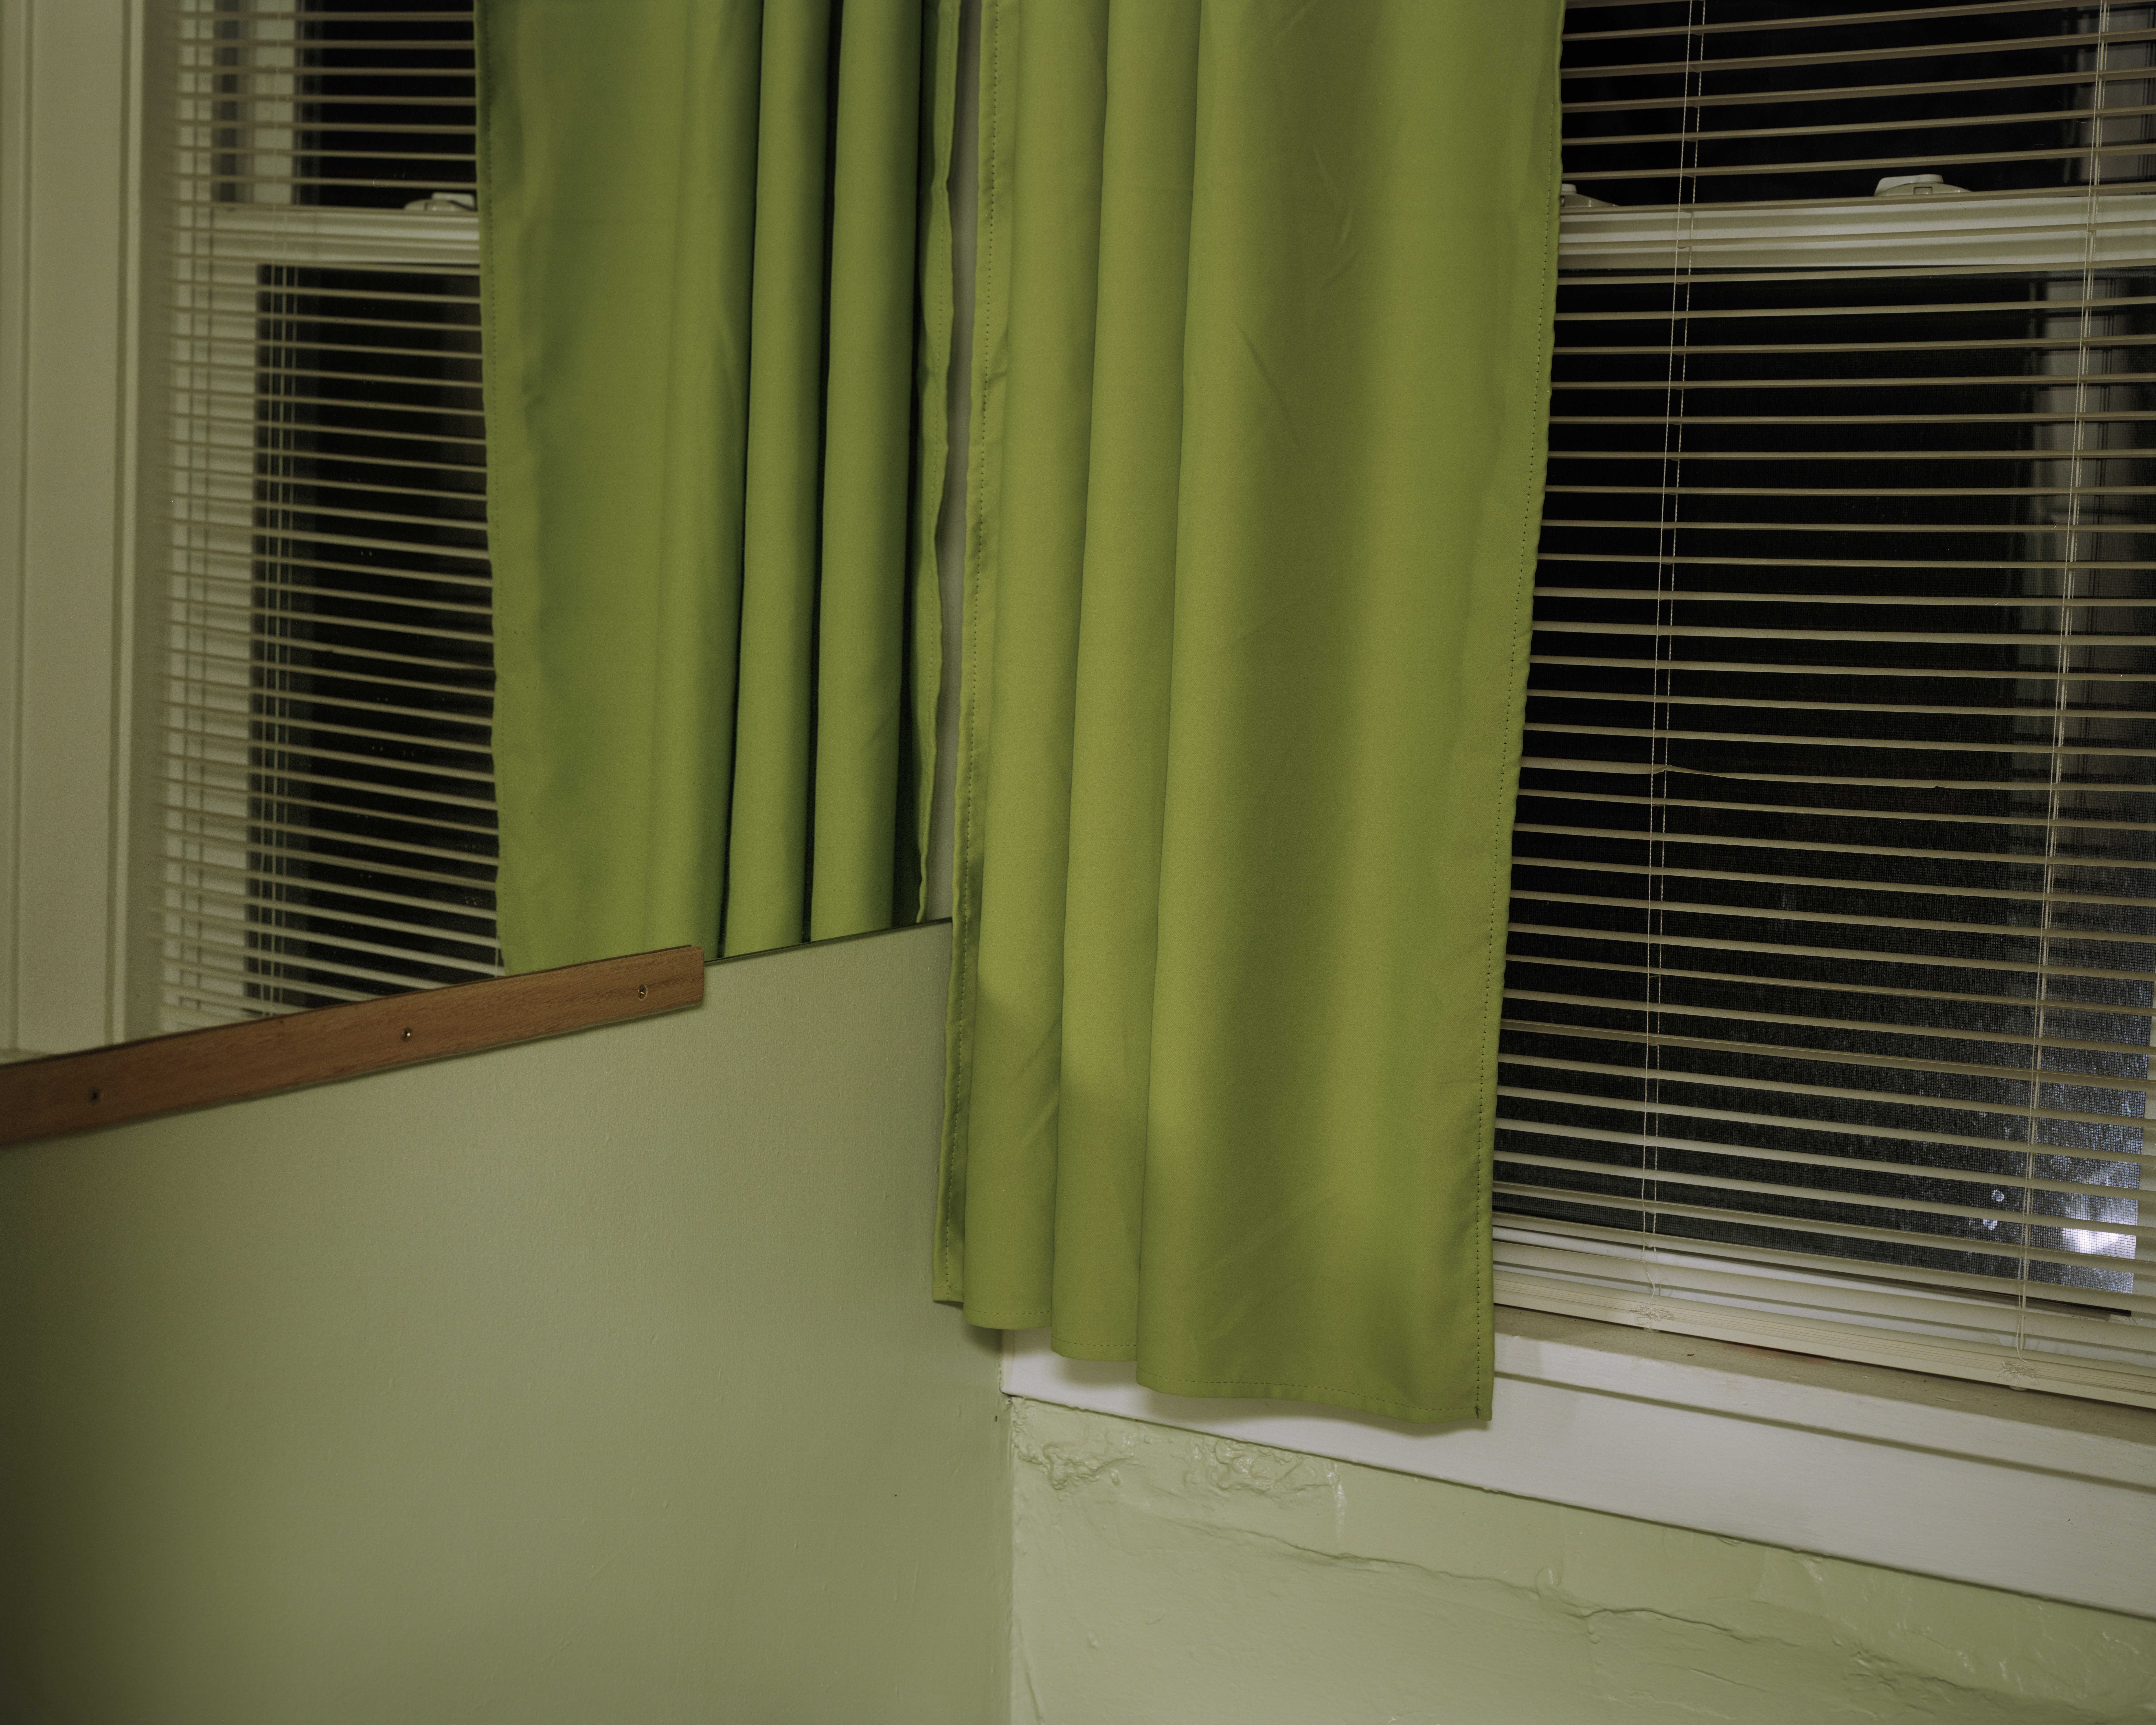 /Photograph%20of%20a%20corner%20of%20a%20green%20room%20at%20night.%20On%20the%20right%20is%20a%20window%20with%20open%20blinds%20and%20an%20olive%20green%20curtain.%20Everything%20is%20reflected%20on%20the%20left%20through%20a%20mirror.%20